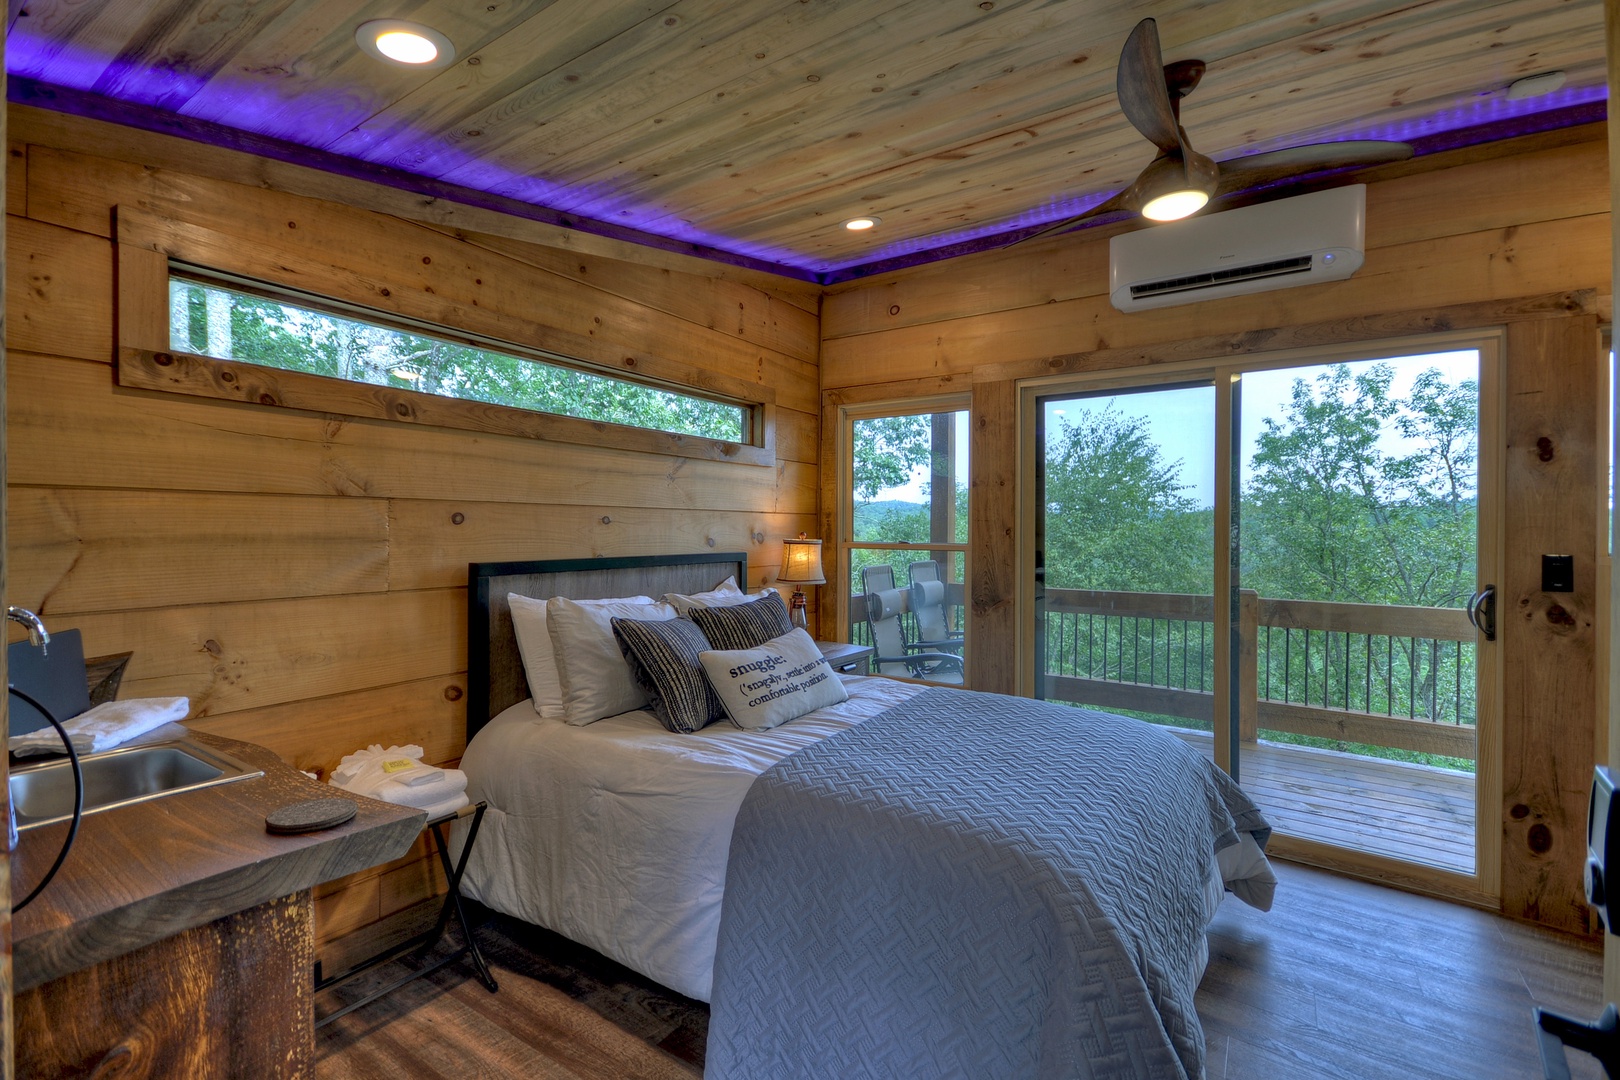 3 Peaks- Queen bed in the treehouse